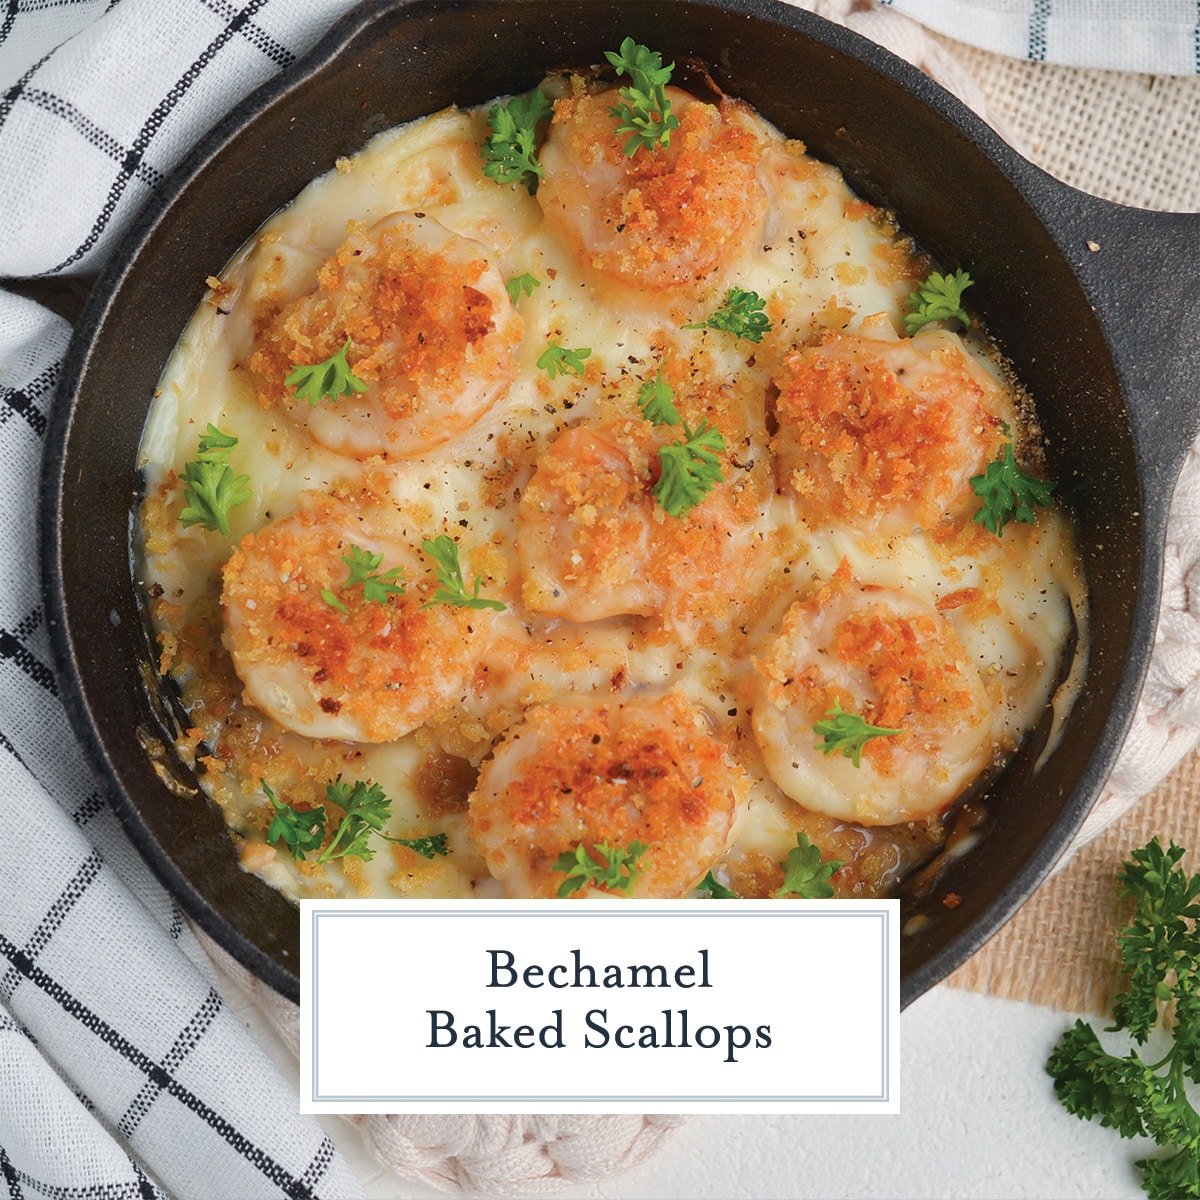 baked scallop recipe with text overlay